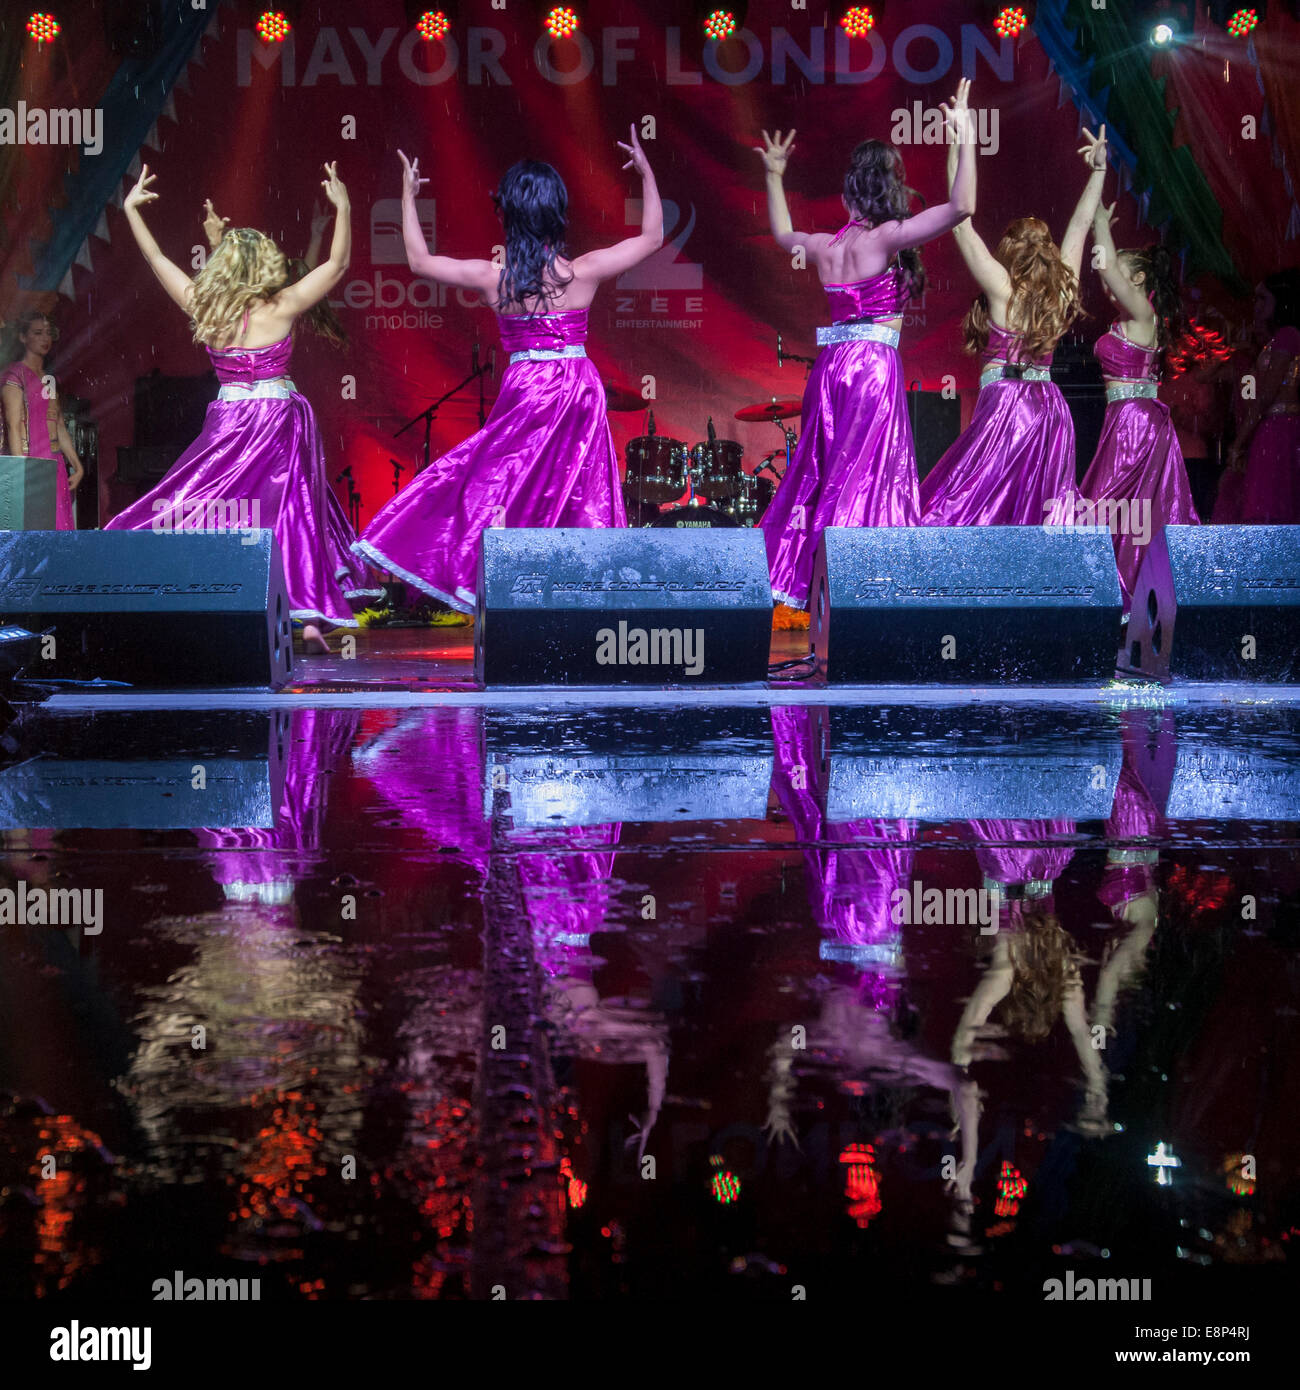 London, UK, 12th October 2014.  Thousands gathered in the rain in Trafalgar Square to celebrate the annual Diwali Festival and to enjoy Bollywood dances which took place on a soaked stage which created eye-catching reflections.    Credit:  Stephen Chung/Alamy Live News Stock Photo